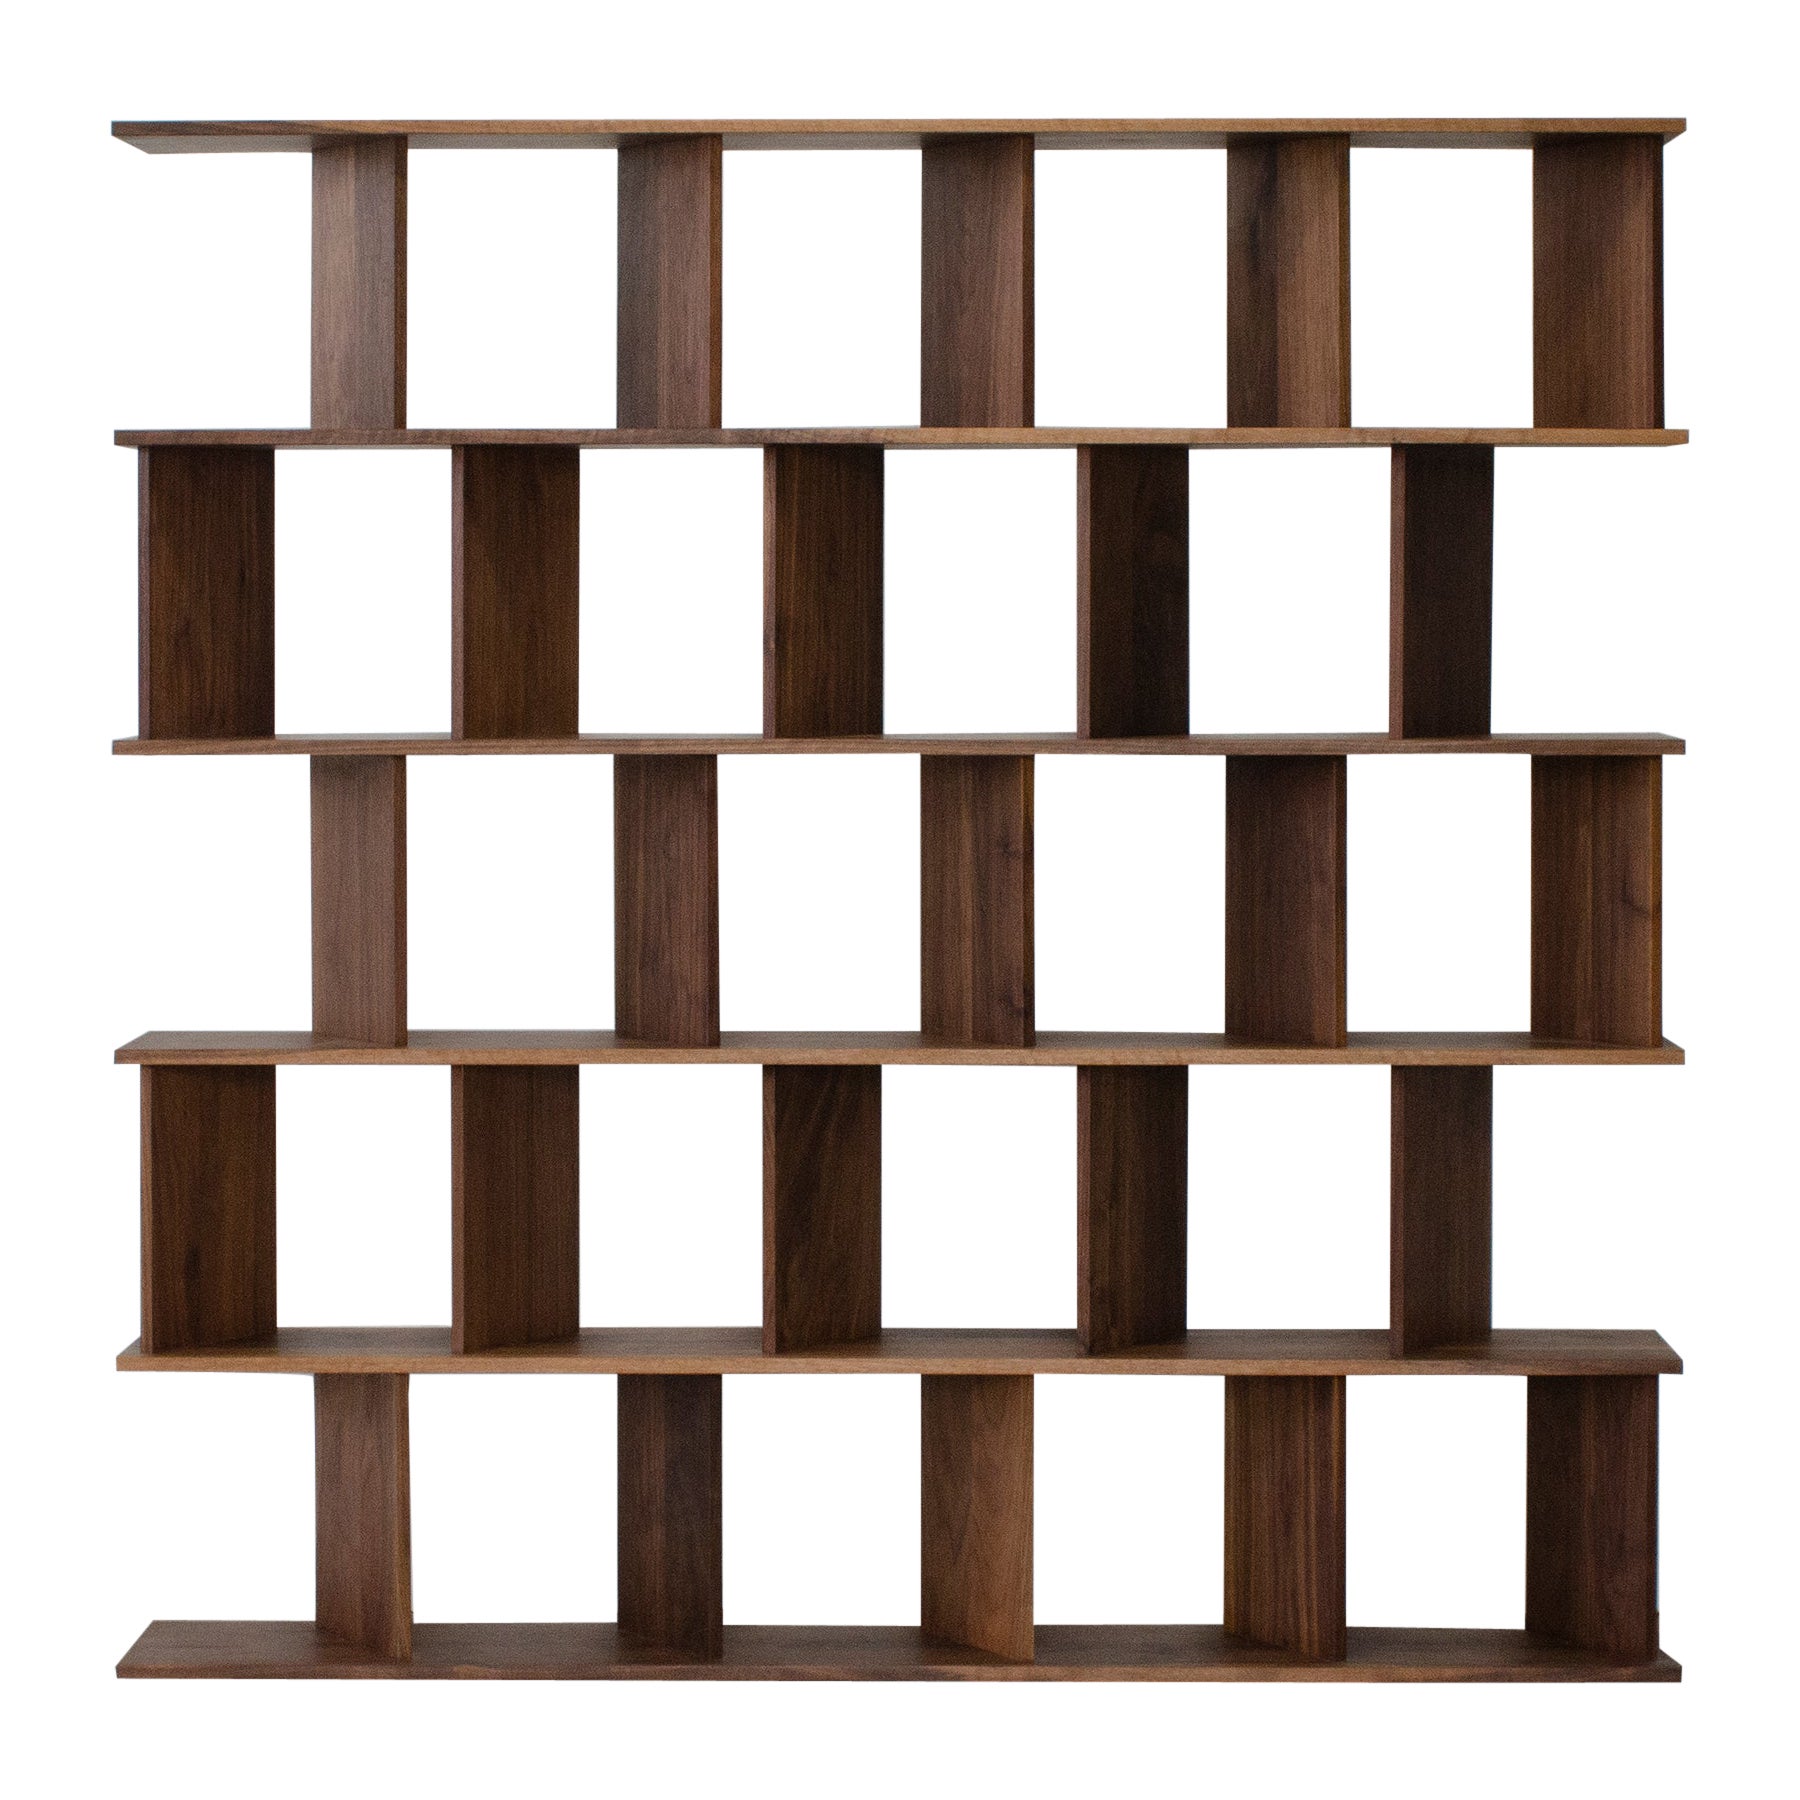 Contemporary Shelving Room Divider "30/30 L" in Walnut by Casey Lurie Studio